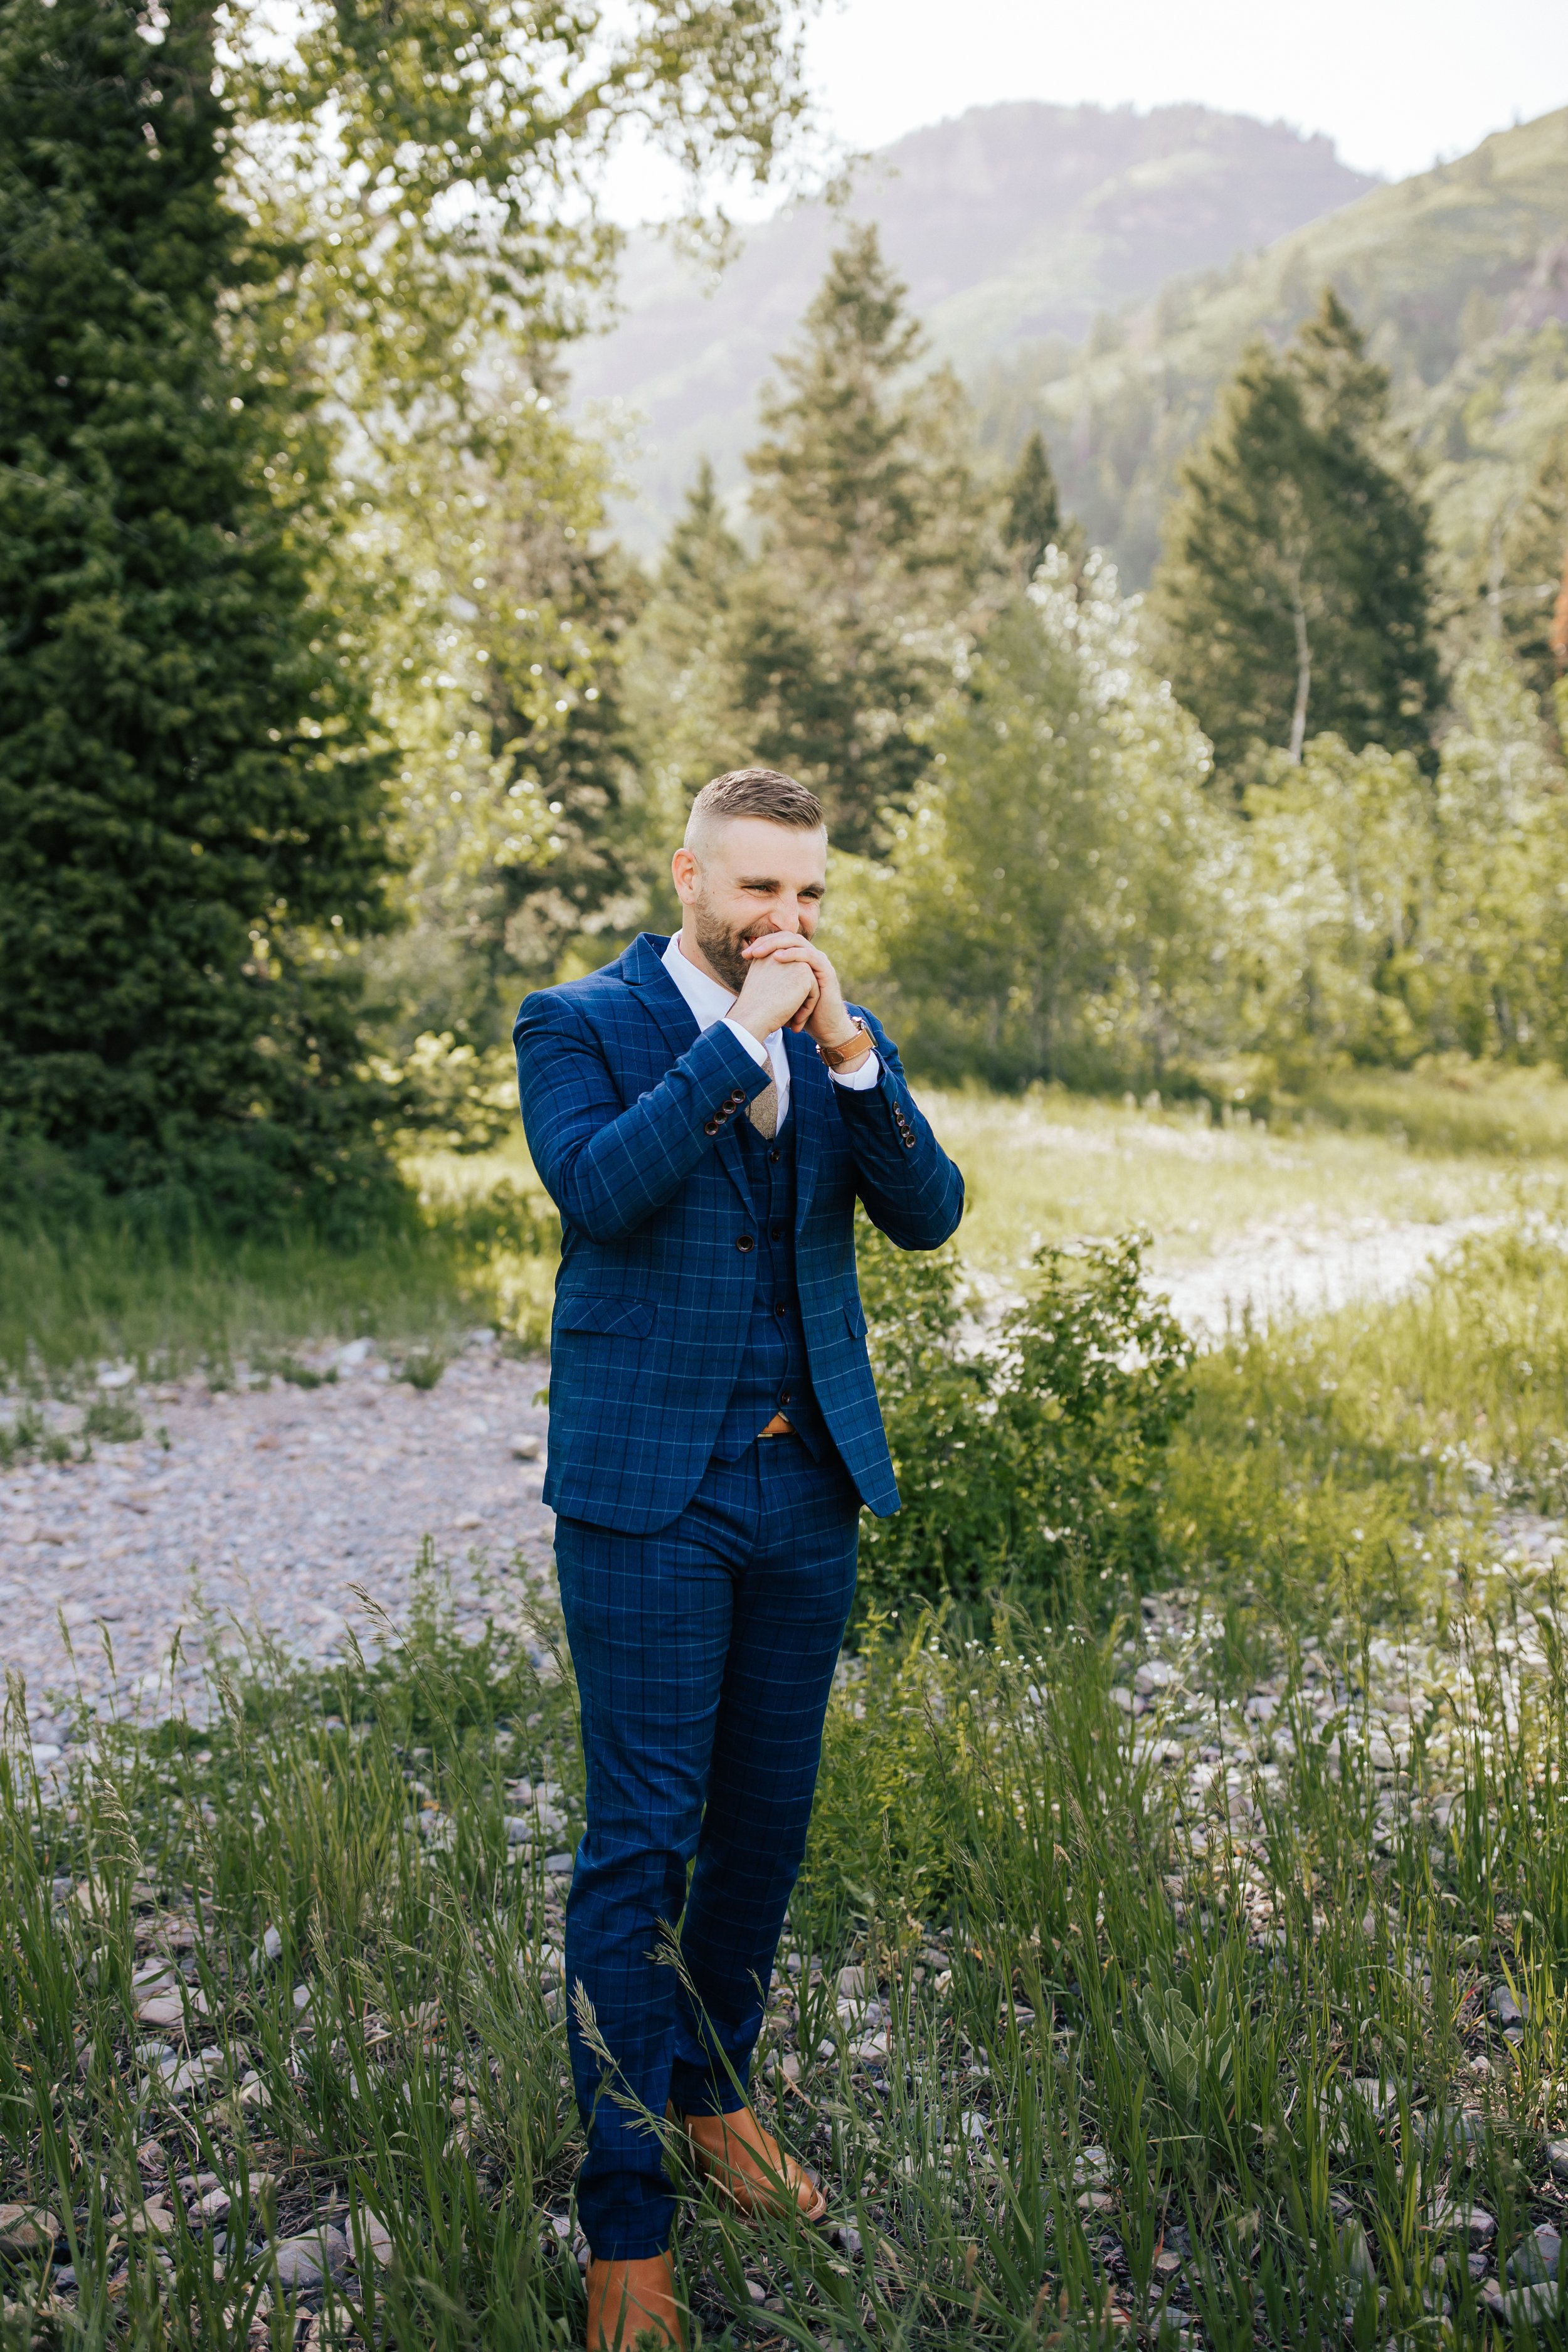  Groom reacts excitedly to seeing his bride for the first time in her wedding dress during first look session. Provo Canyon, Utah. 